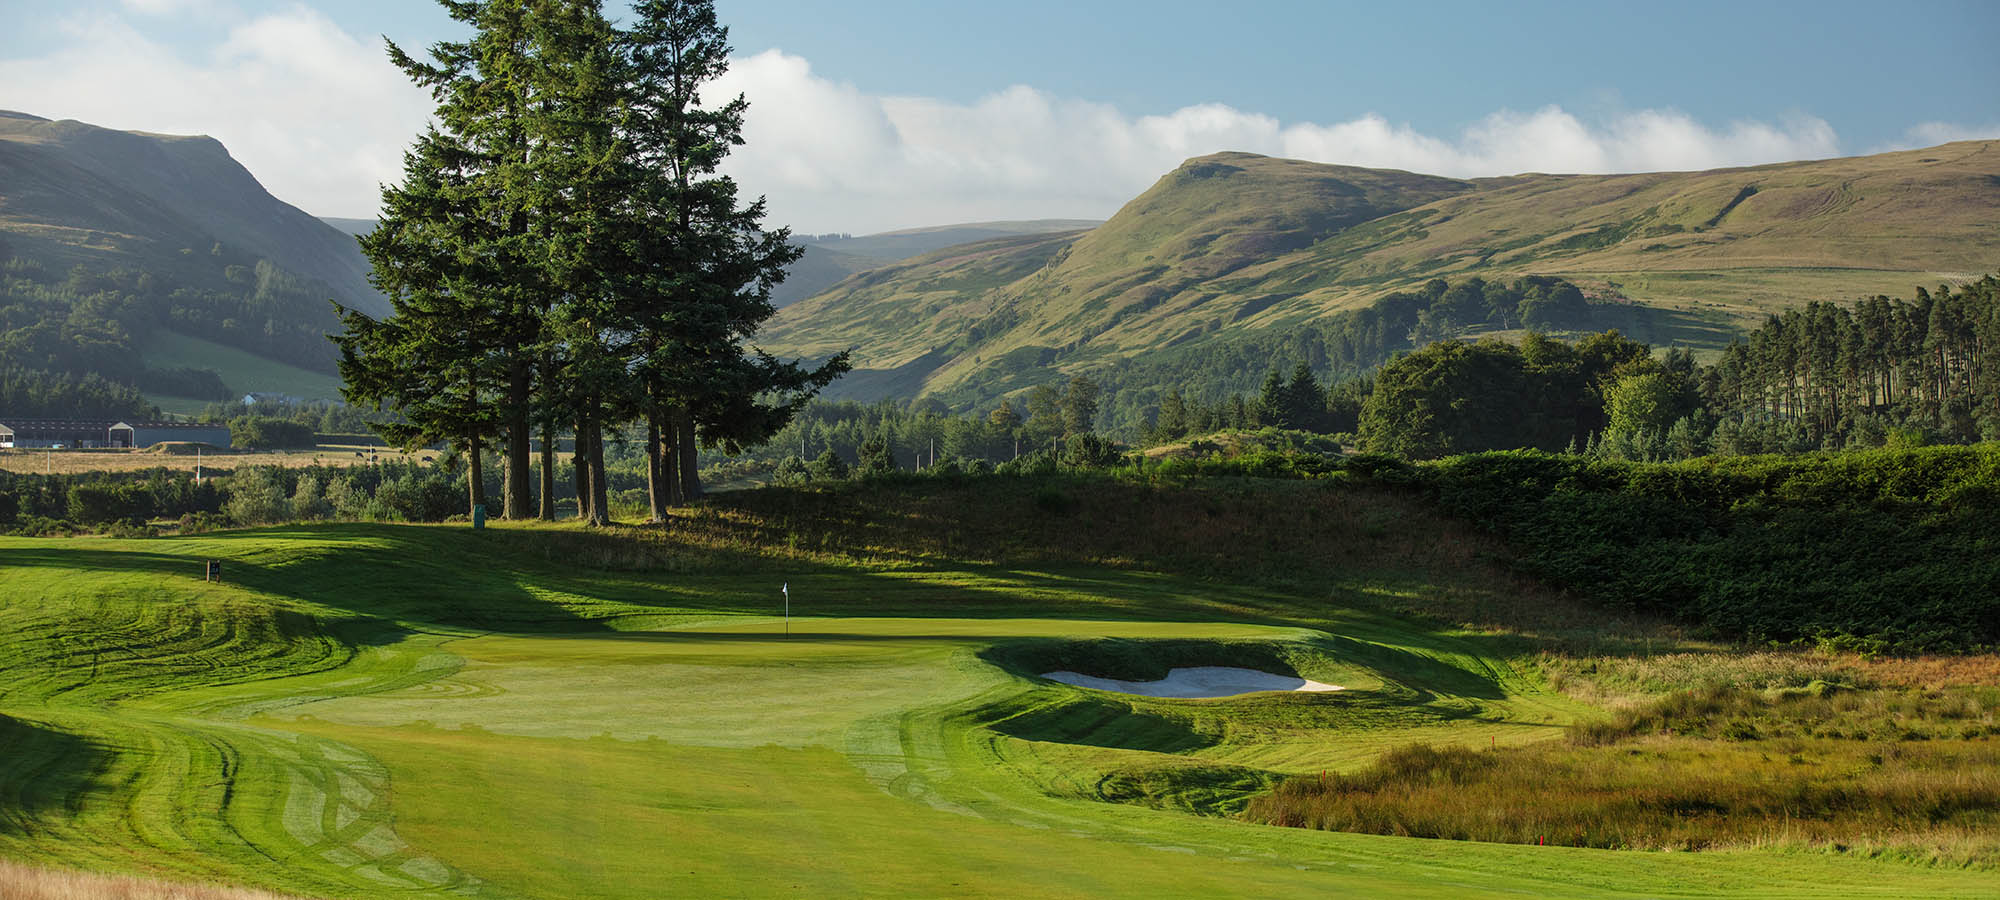 View towards the Glendevon and Ochil hills from the 1st tee on the PGA